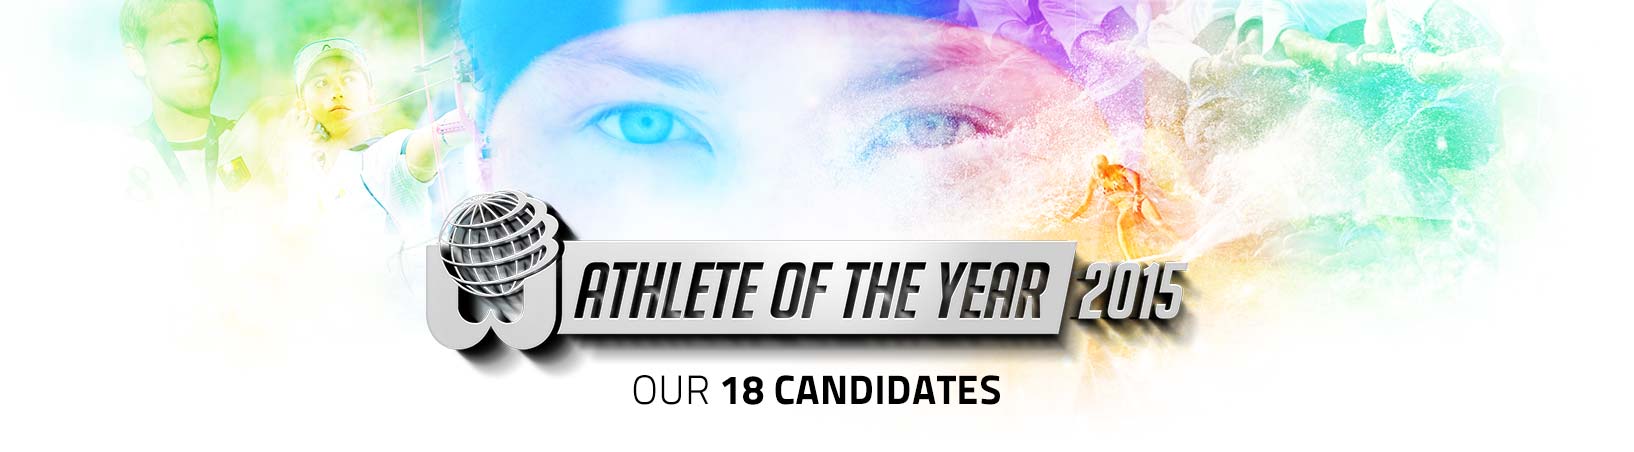 Athlete of the year 2015 vote banner